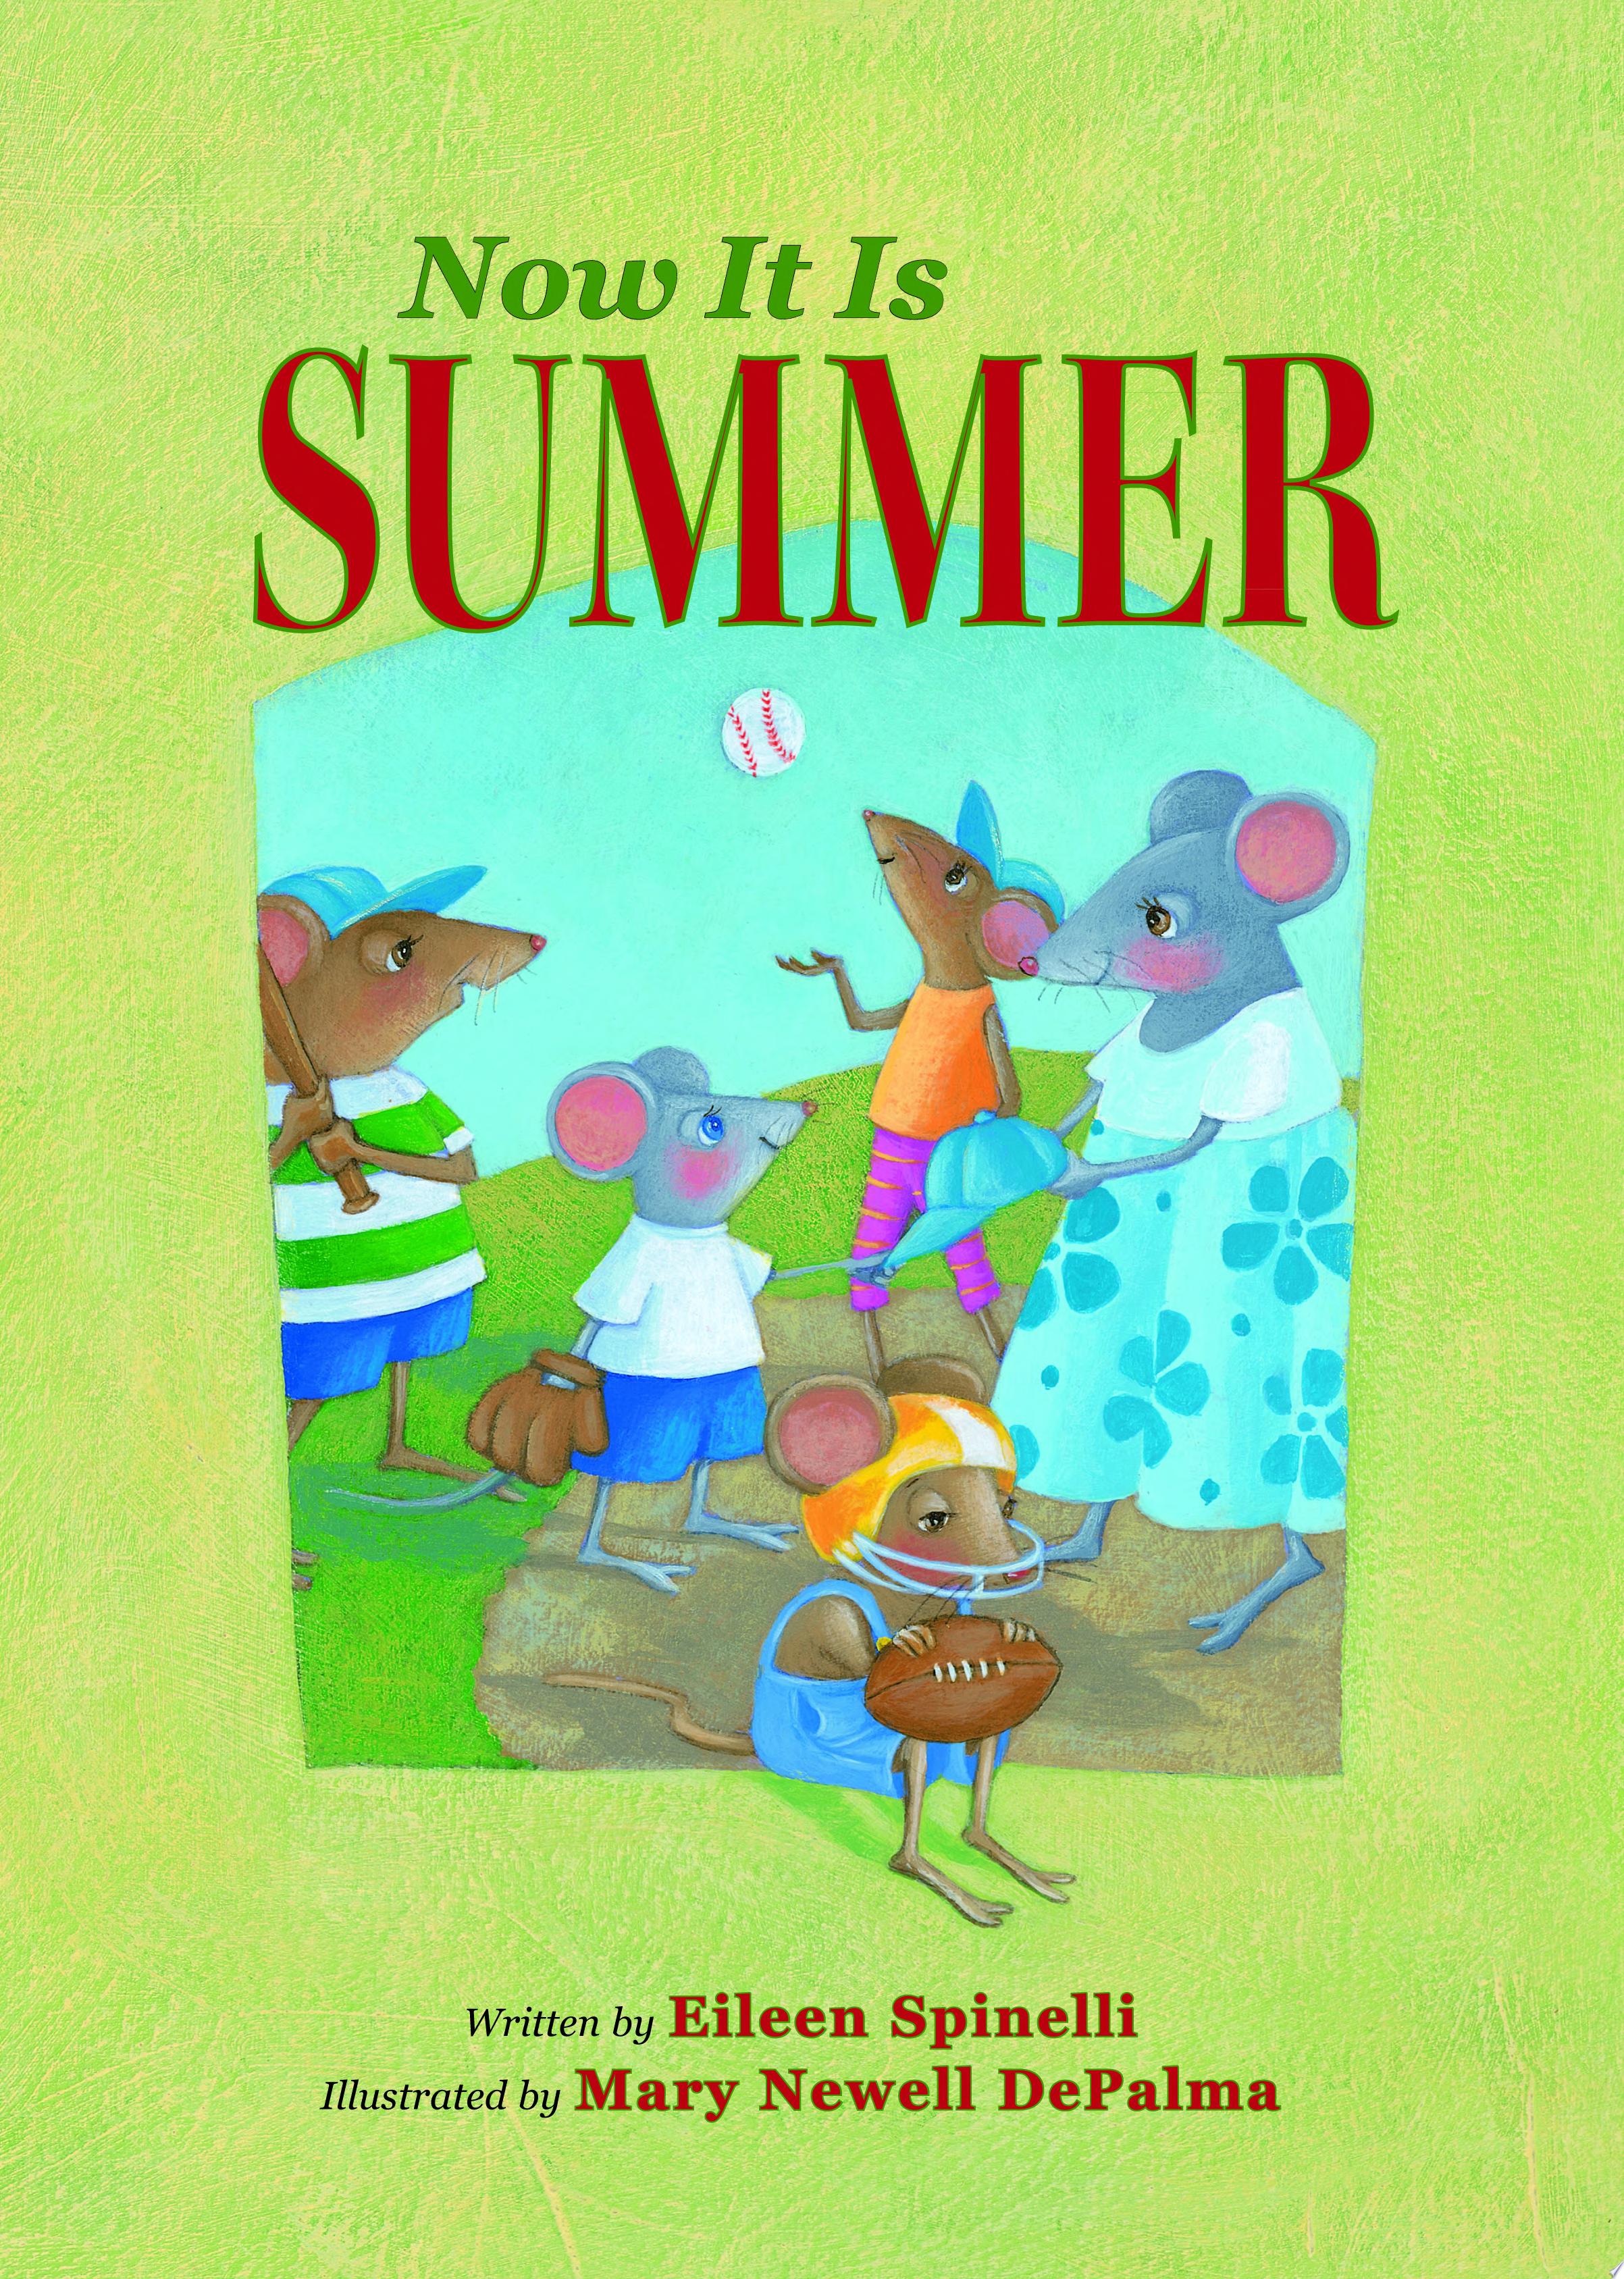 Image for "Now It Is Summer"